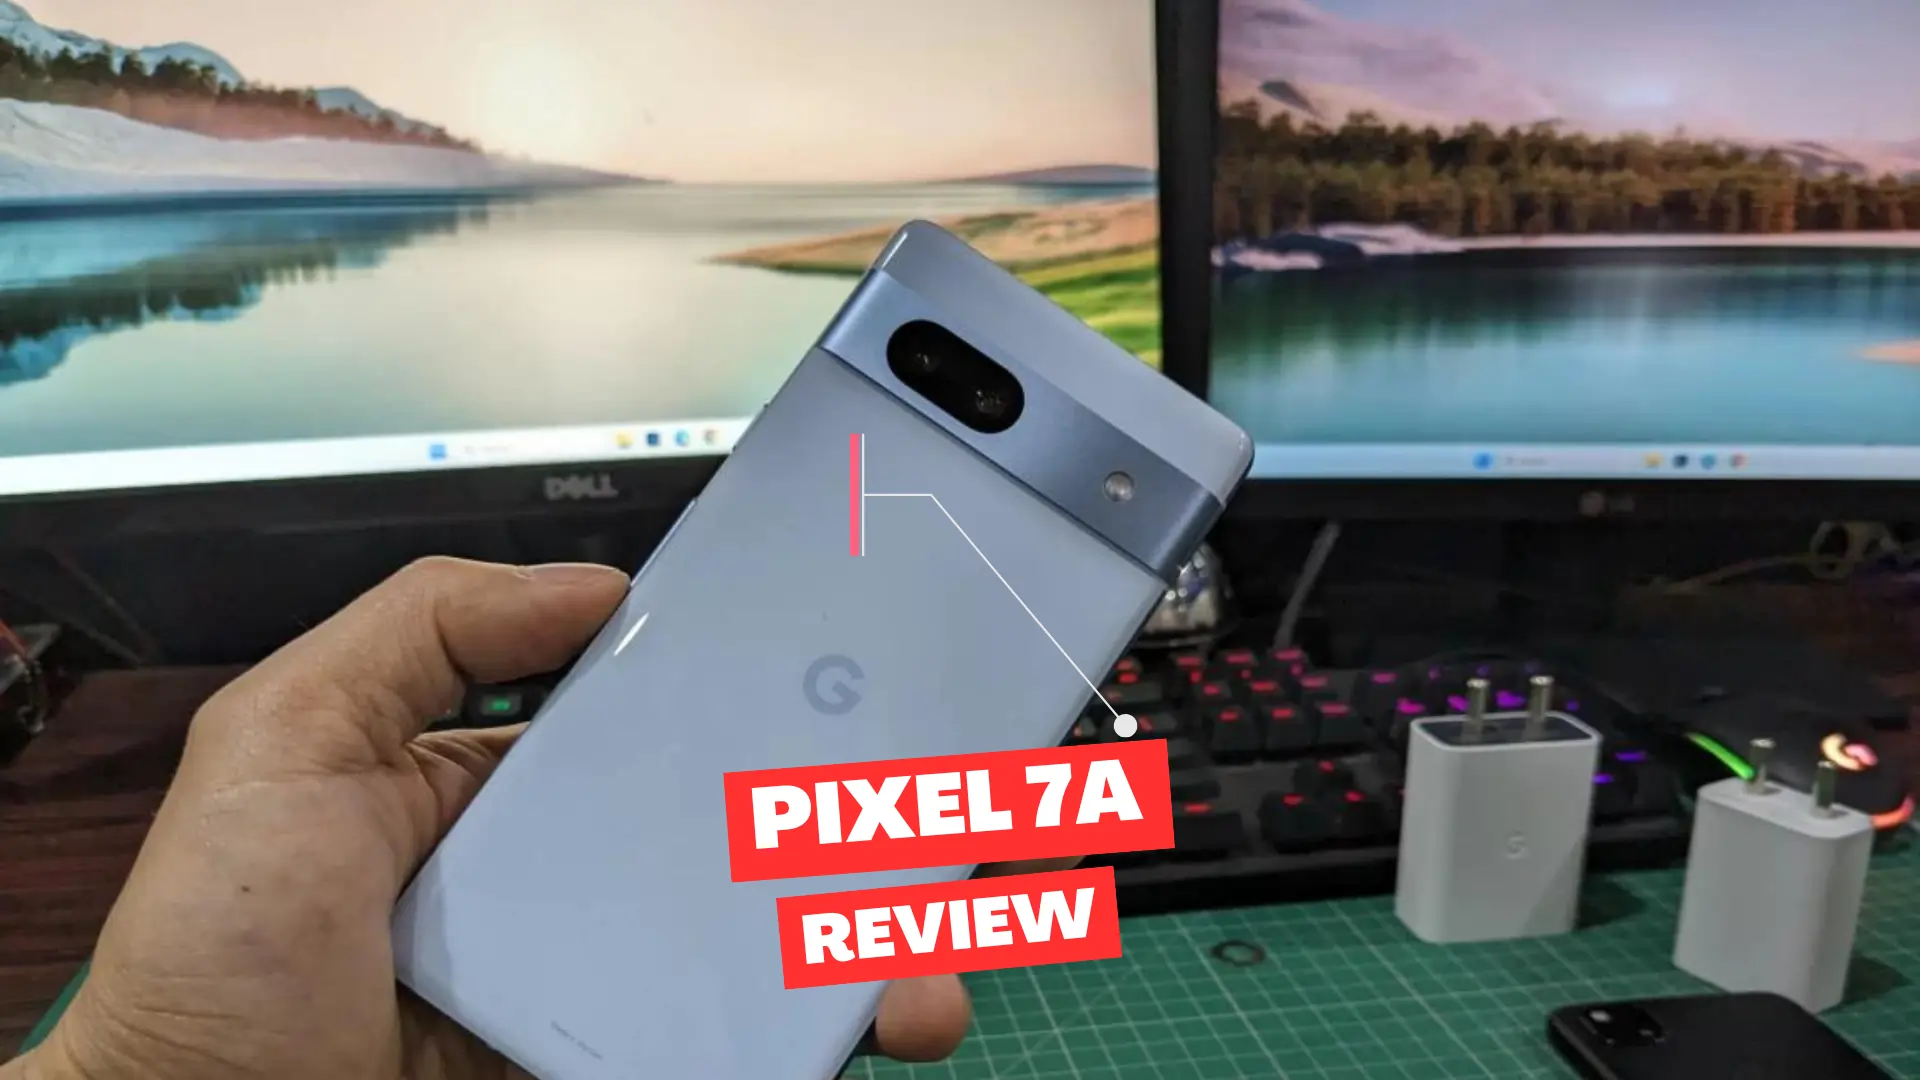 PIXEL 7a Review Cover